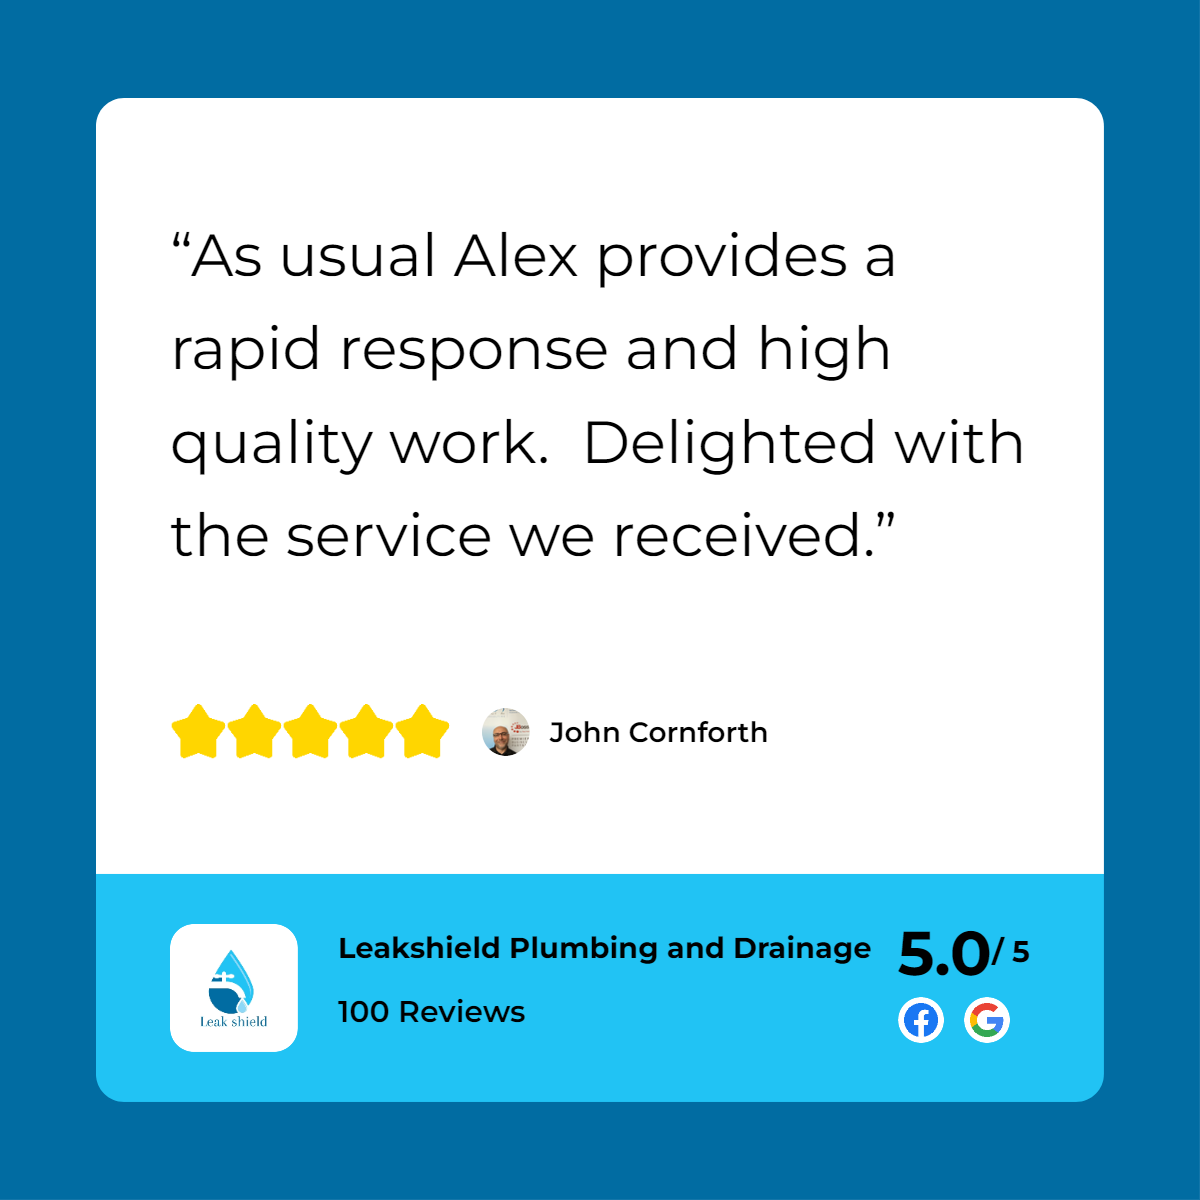 Alex provides a rapid response and high quality service.